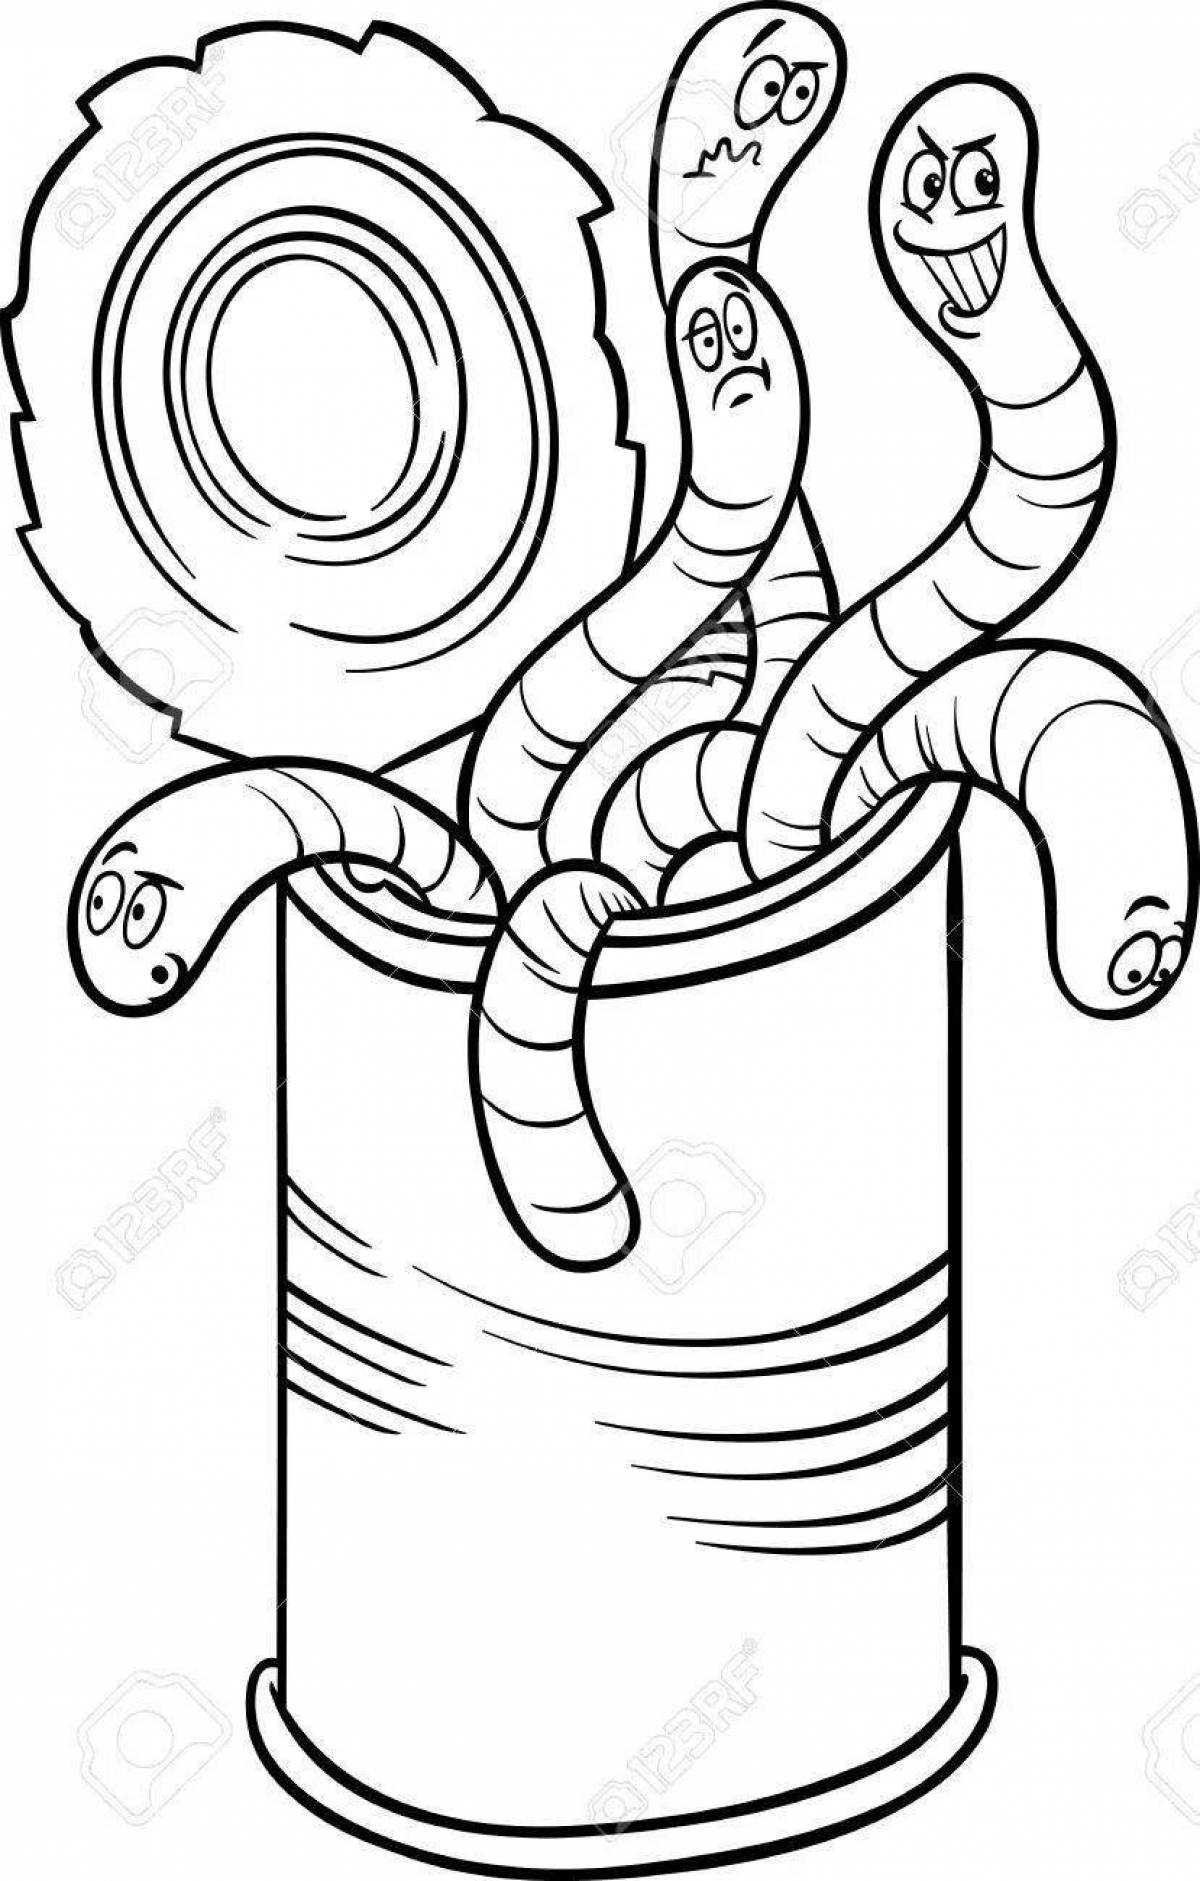 Intriguing worm-eater coloring page